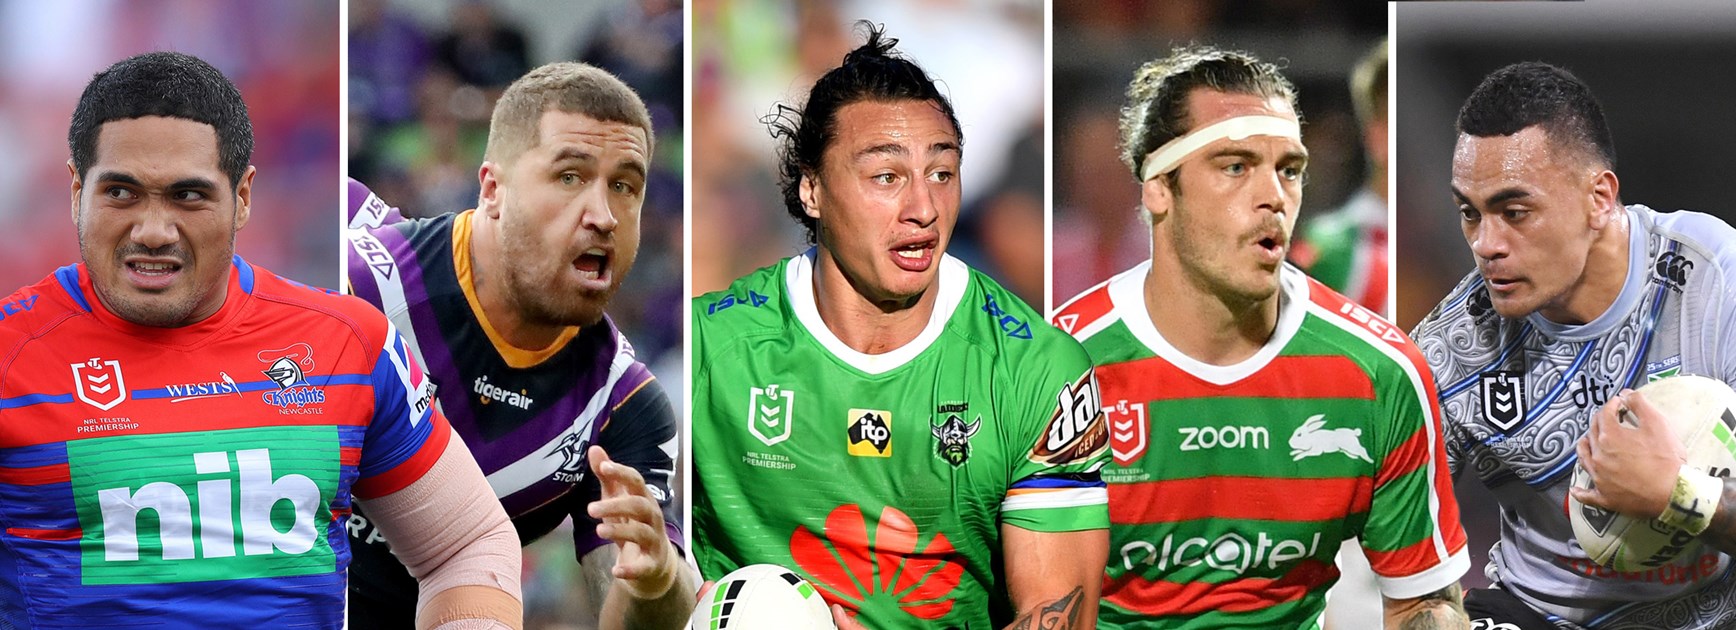 Most improved player in 2019: NRL.com experts view